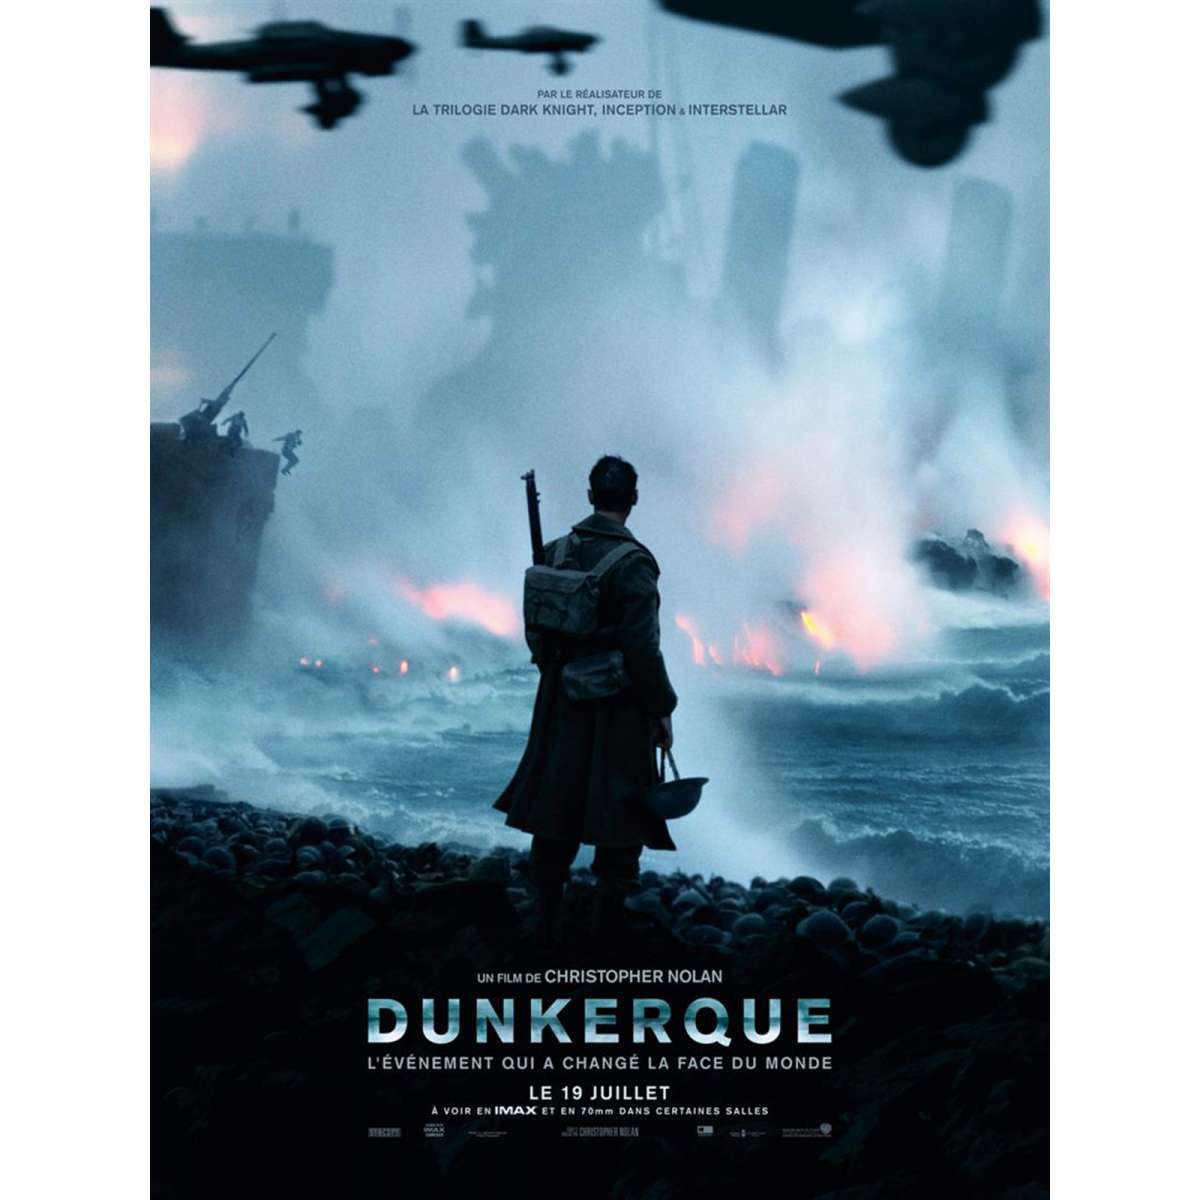 Voyage en salle obscure... - Page 8 Dunkirk-movie-poster-15x21-in-adv-2017-christopher-nolan-tom-hardy